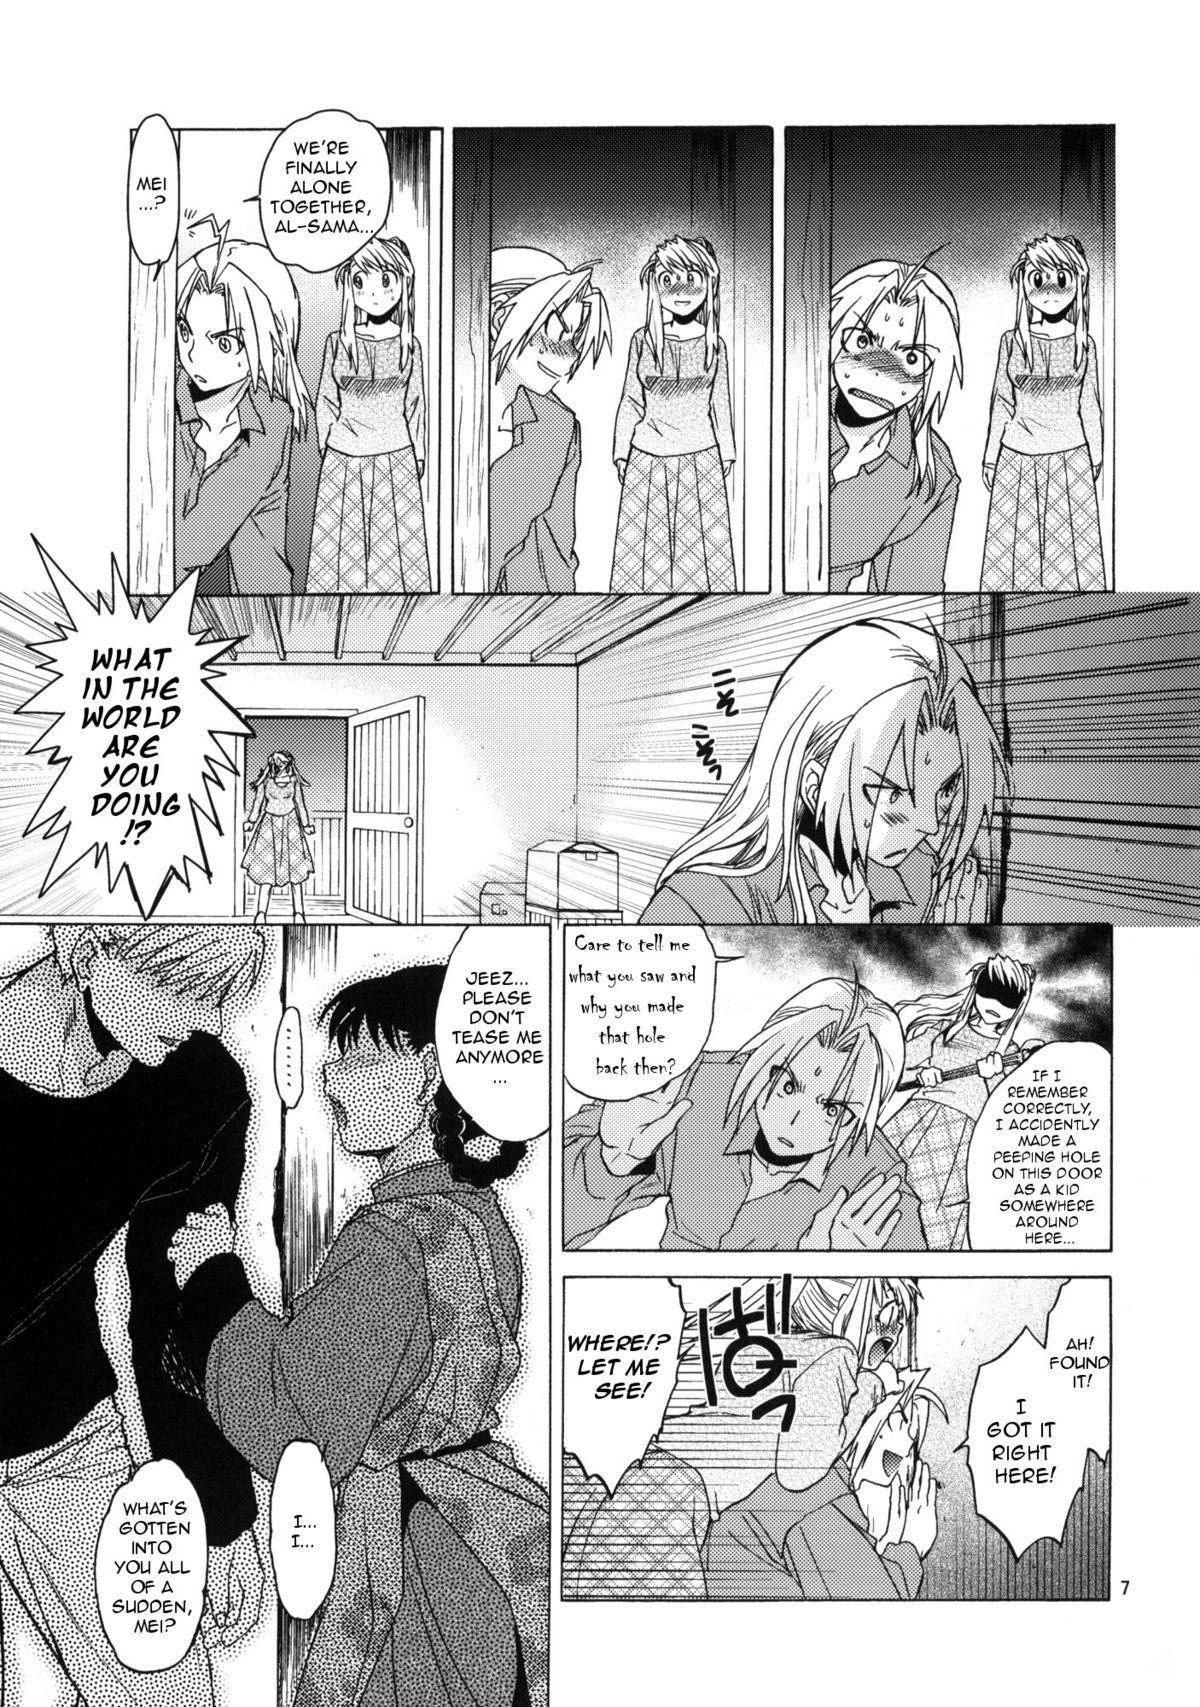 Roleplay EDxWIN 5 Al x May! - Fullmetal alchemist Neighbor - Page 6